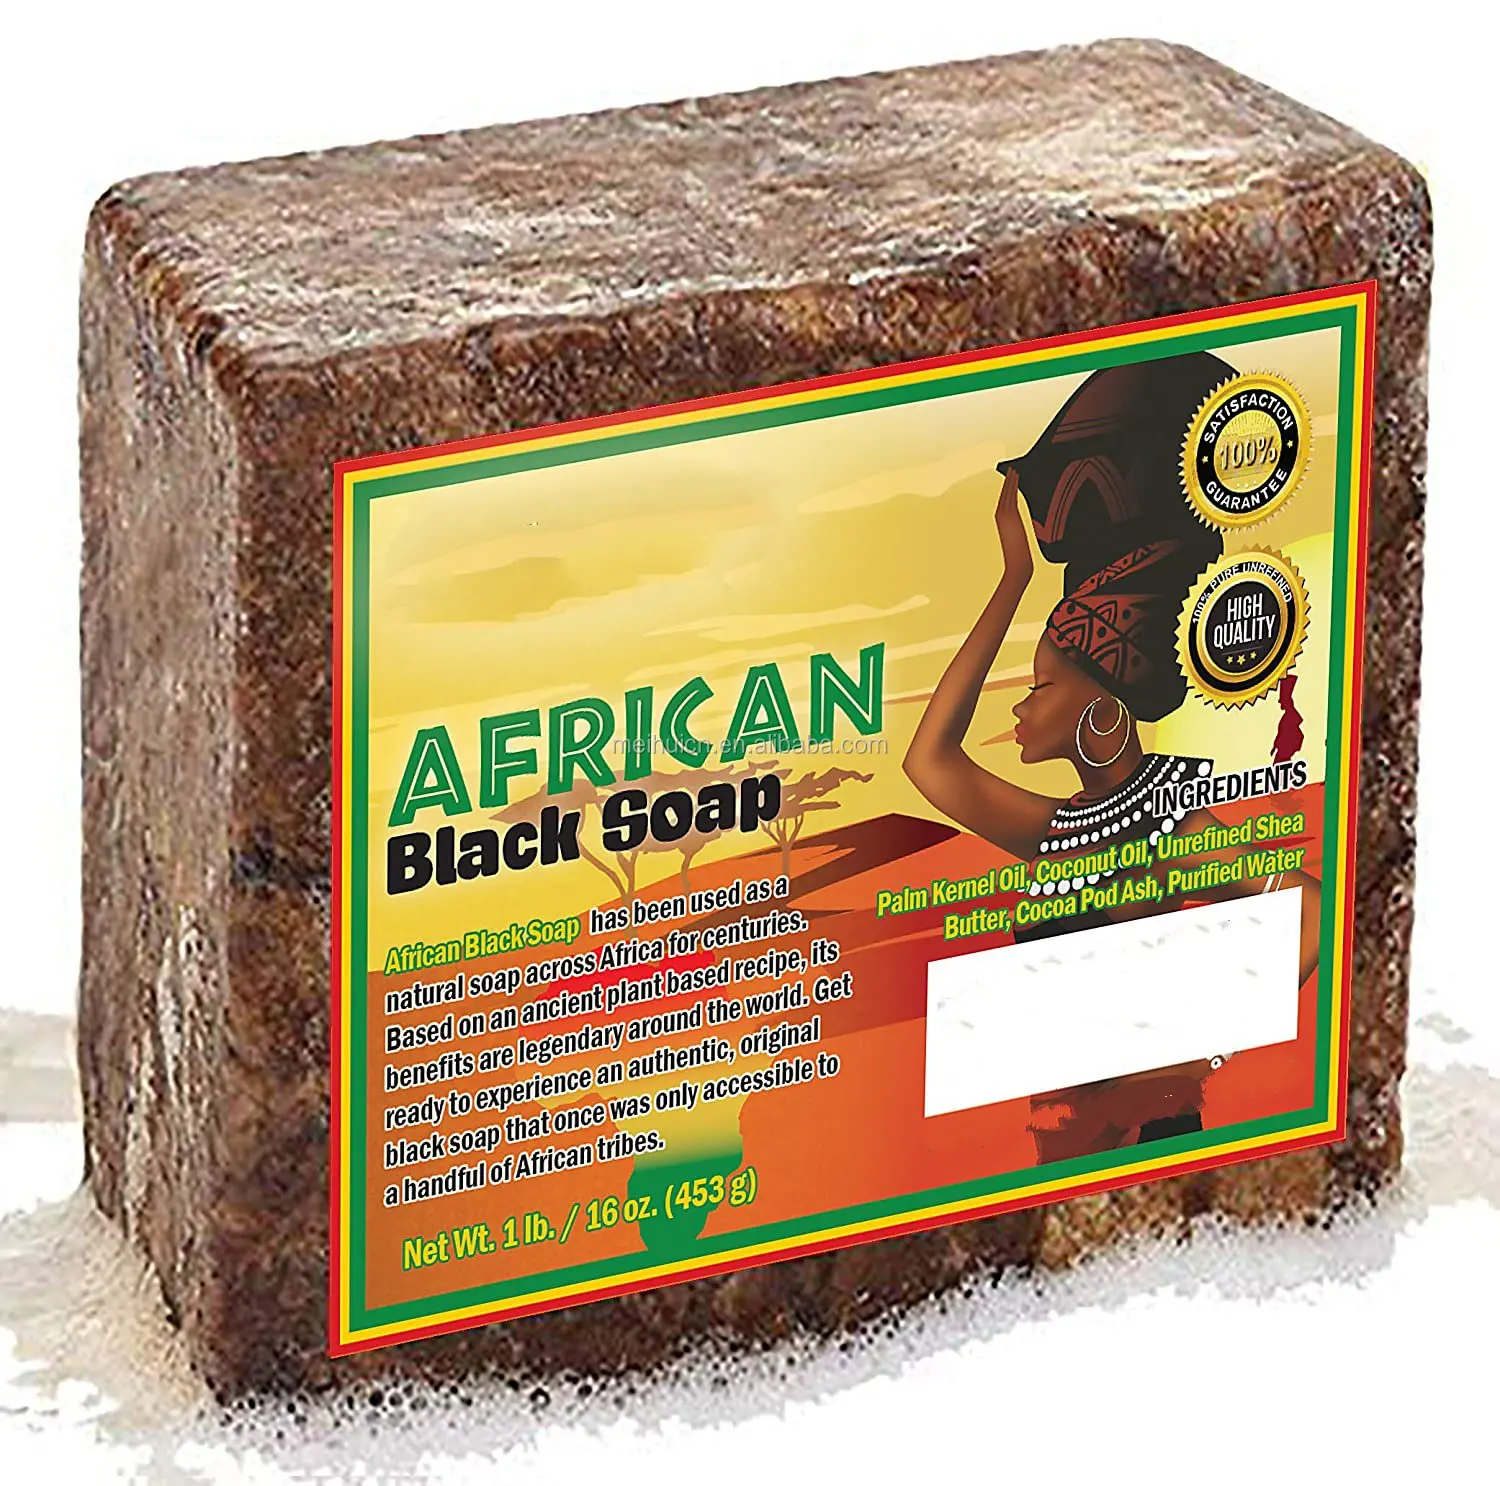 lager Baron Sympton Oem Handmade Soap Natural Anti-acne Face And Body Wash Ghana Raw African  Black Soap - Buy African Black Soap,Black Soap African,Black African Soap  Product on Alibaba.com